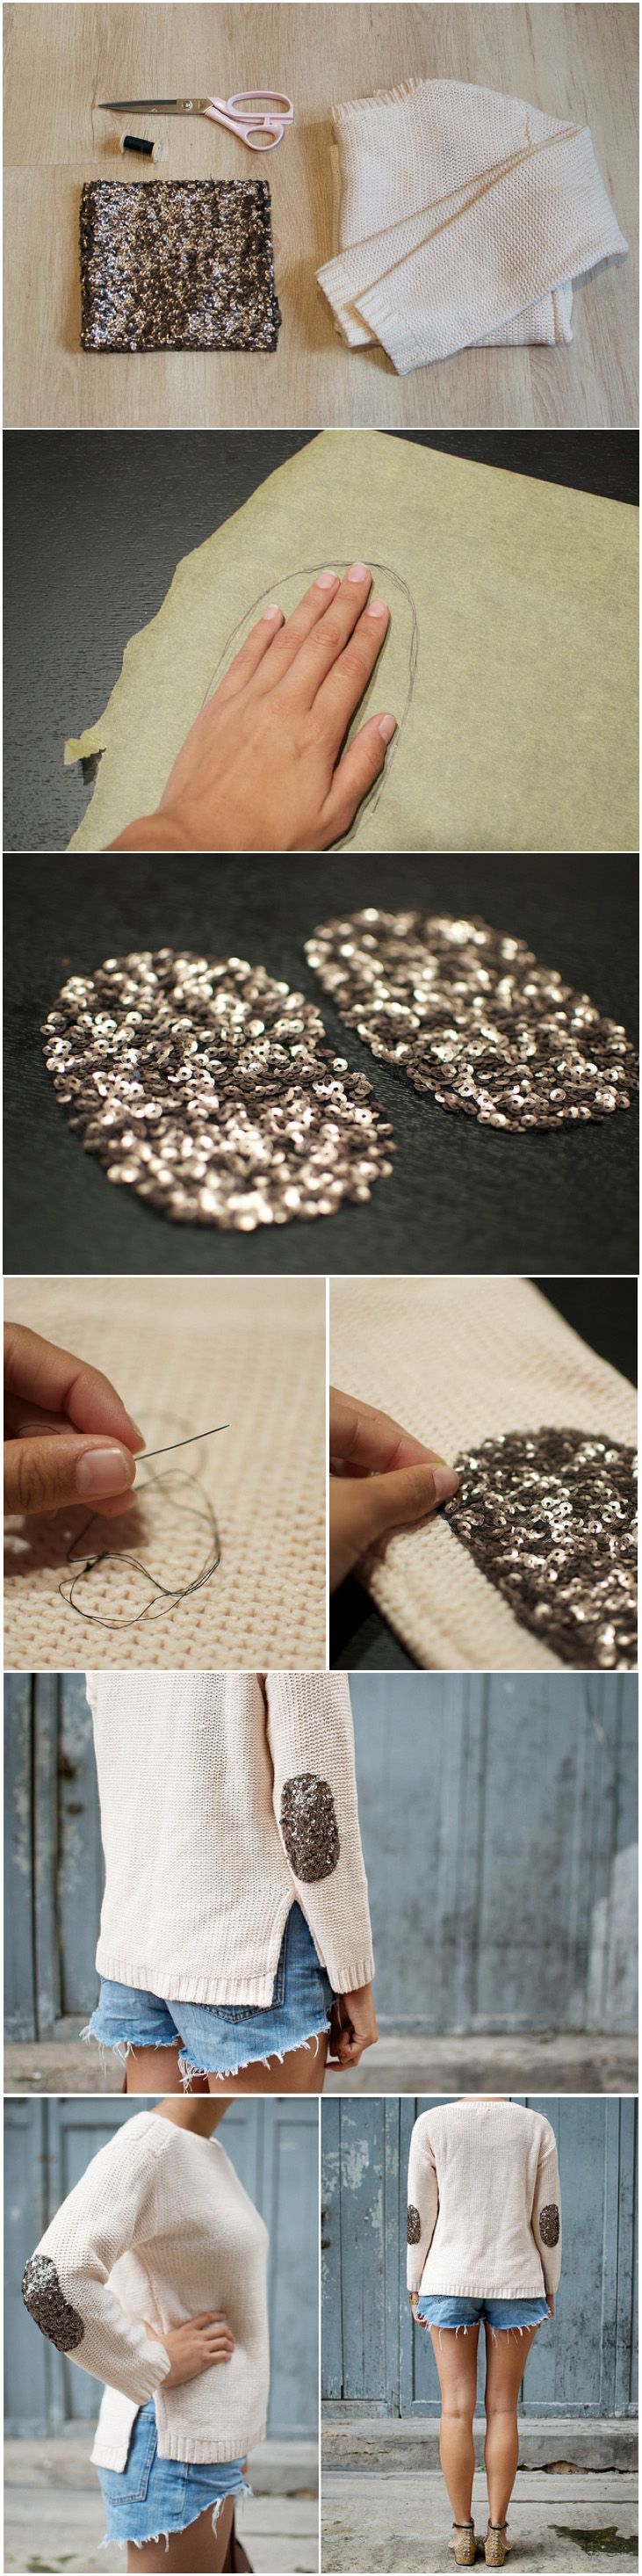 sequin elbow patches